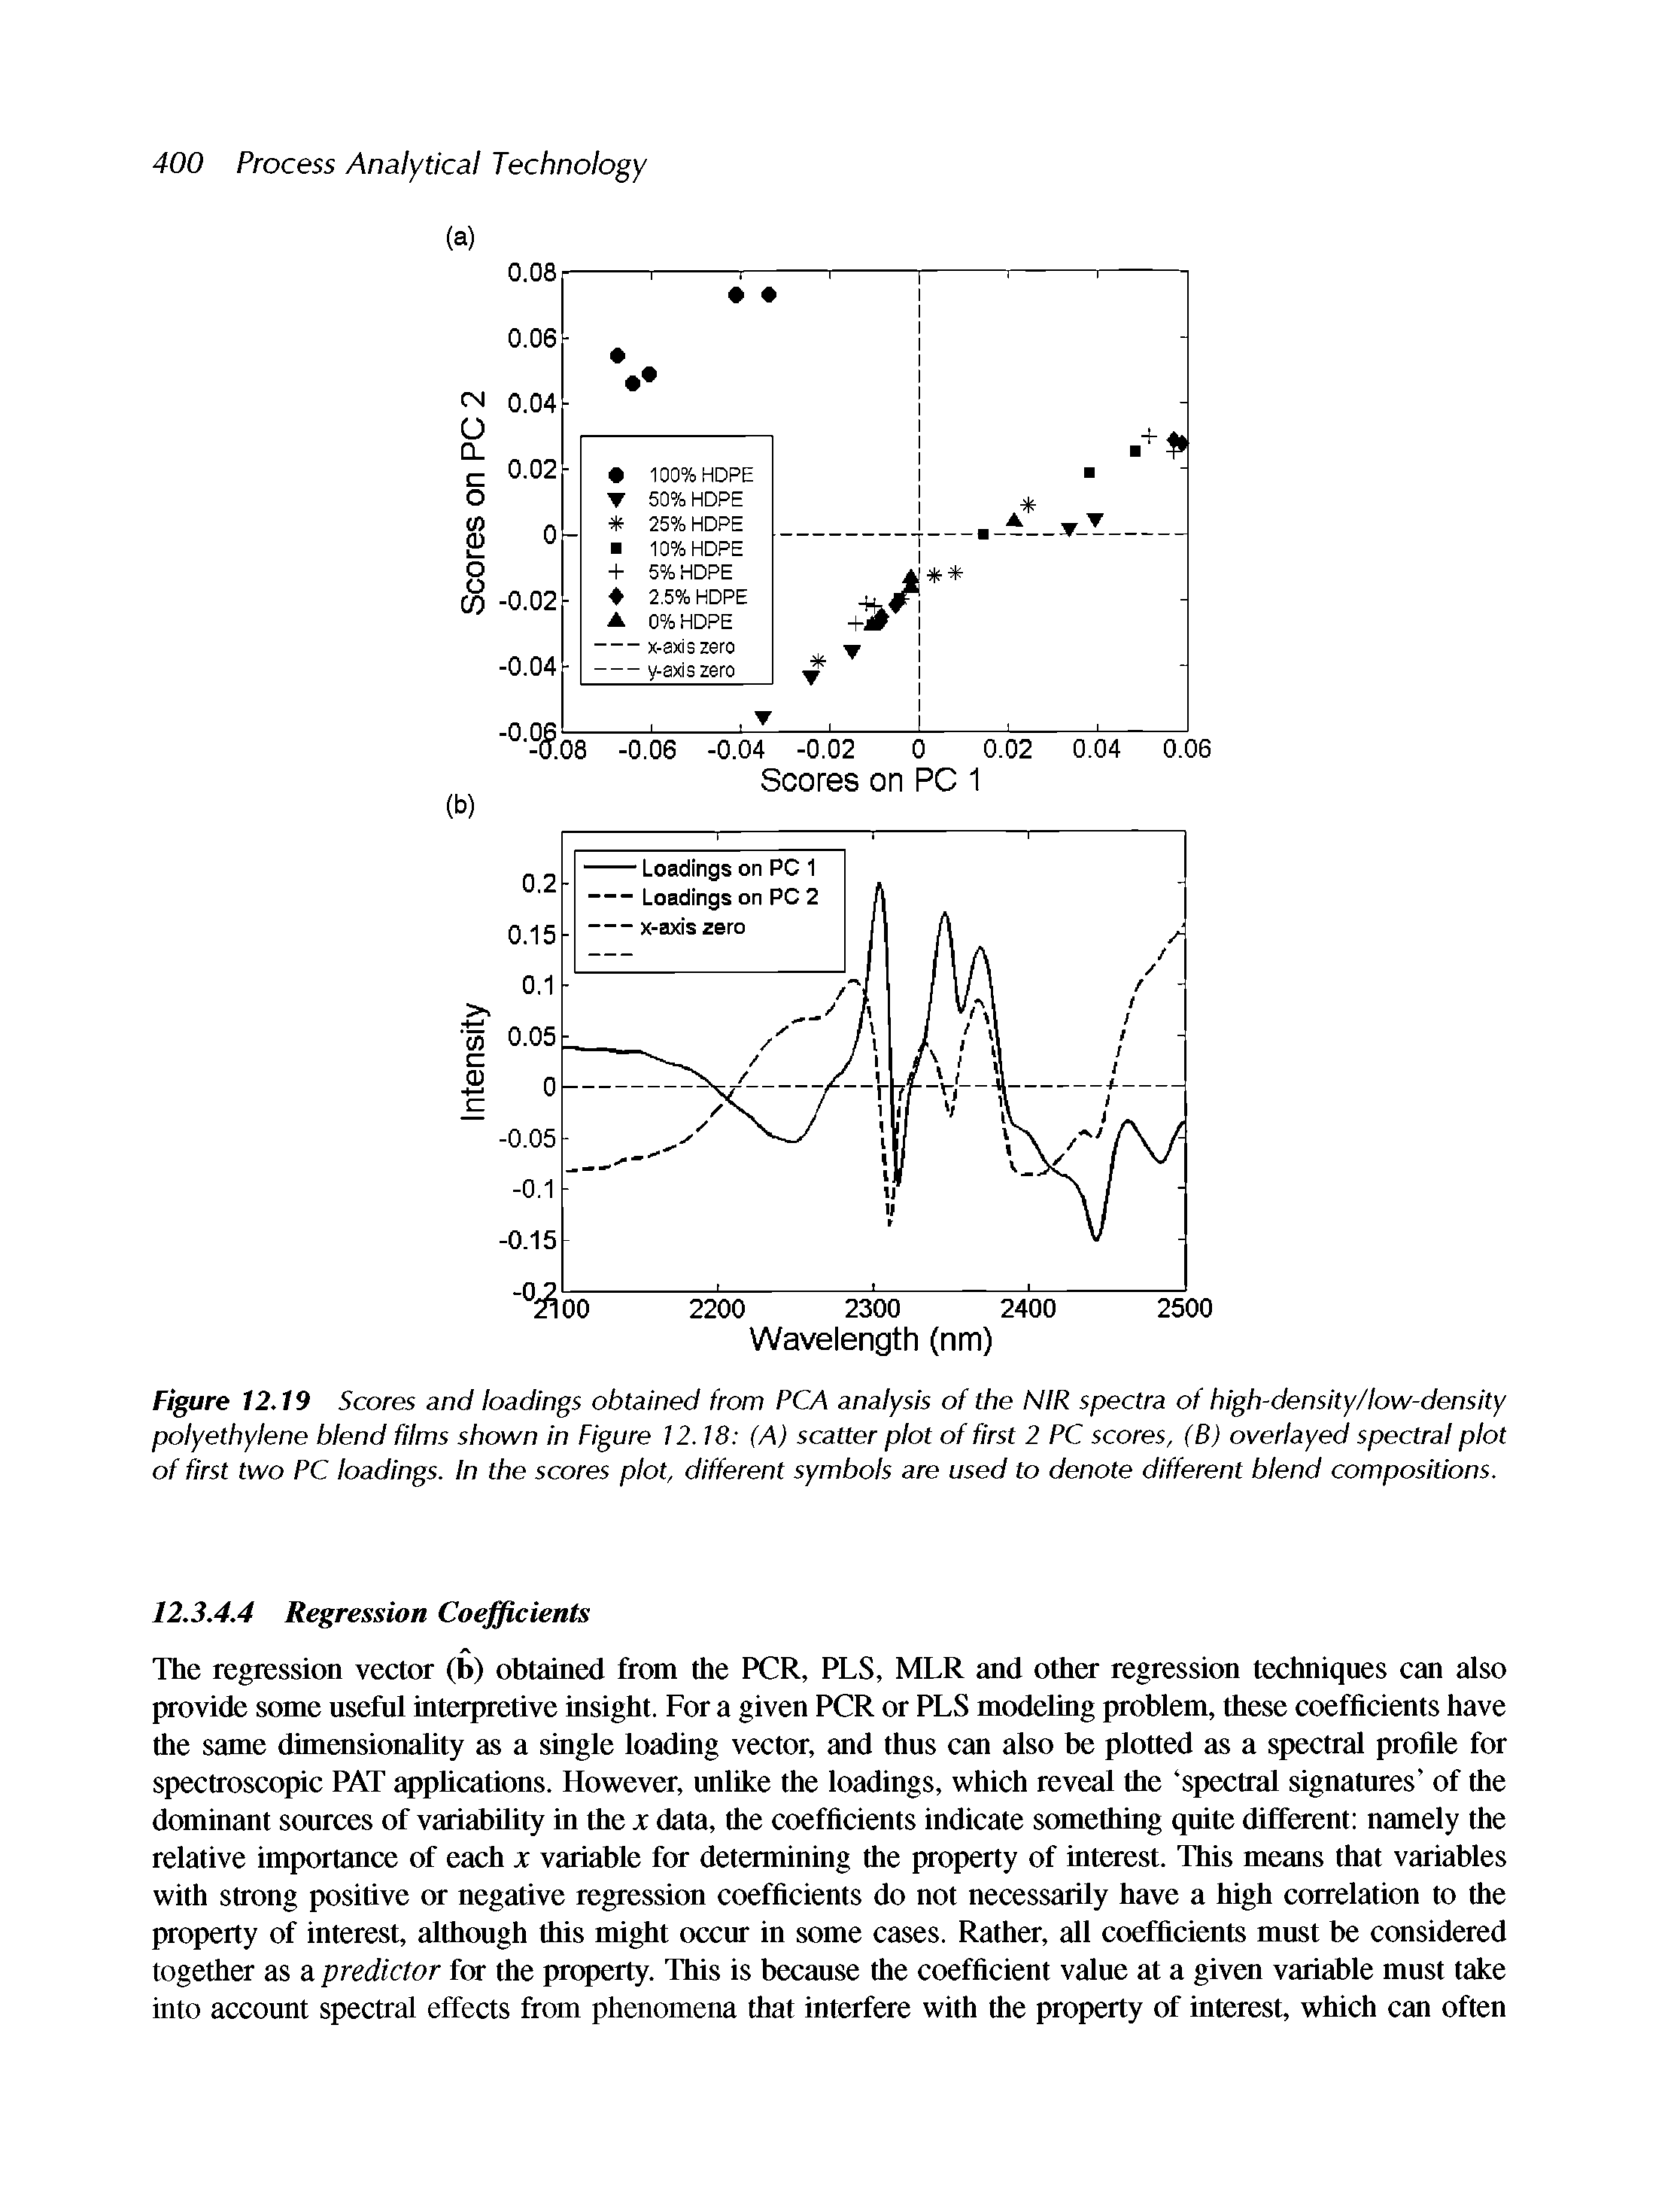 Figure 12.19 Scores and loadings obtained from PCA analysis of the NIR spectra of high-density/hw-denshy polyethylene blend films shown in Figure 12.18 (A) scatter plot of first 2 PC scores, (B) overlayed spectral plot of first two PC loadings. In the scores plot, different symbols are used to denote different blend compositions.